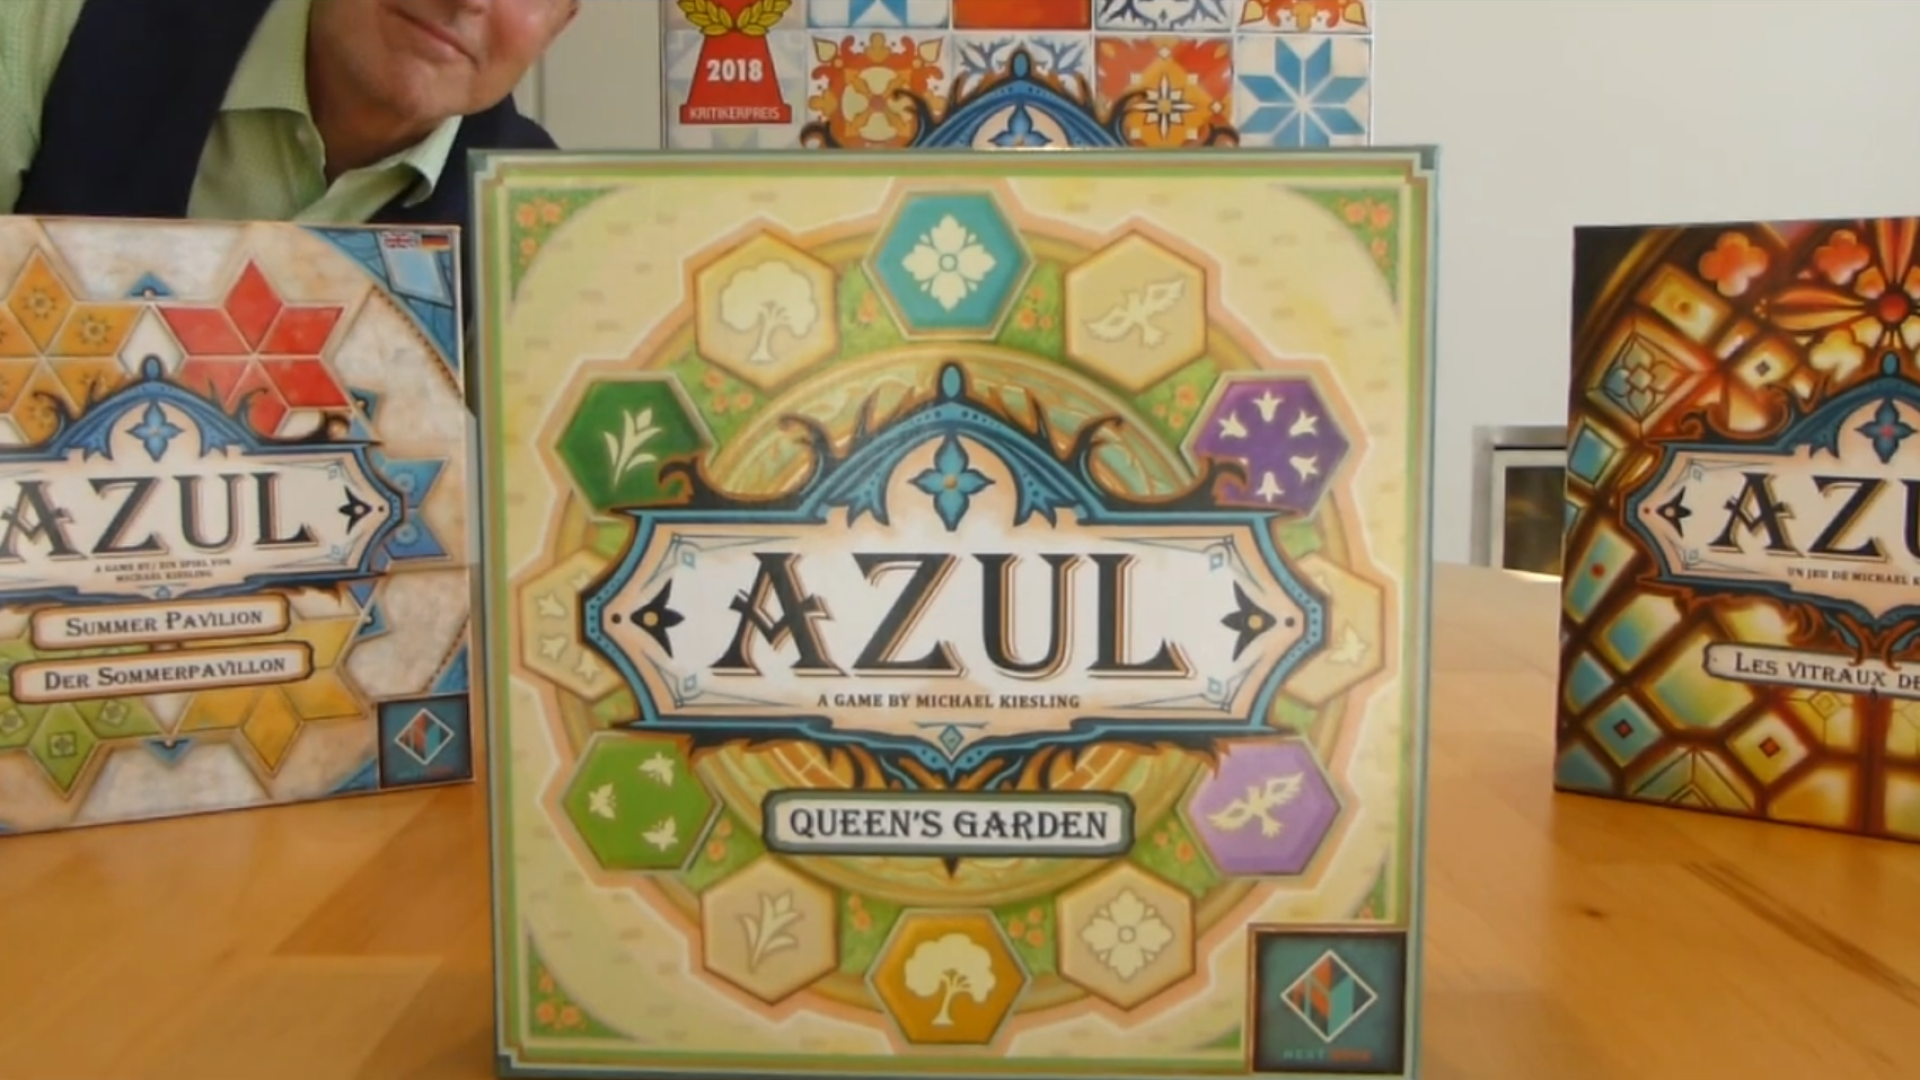 Image for Azul: Queen’s Garden, the next entry in the mosaic board game series, has been teased for late 2021